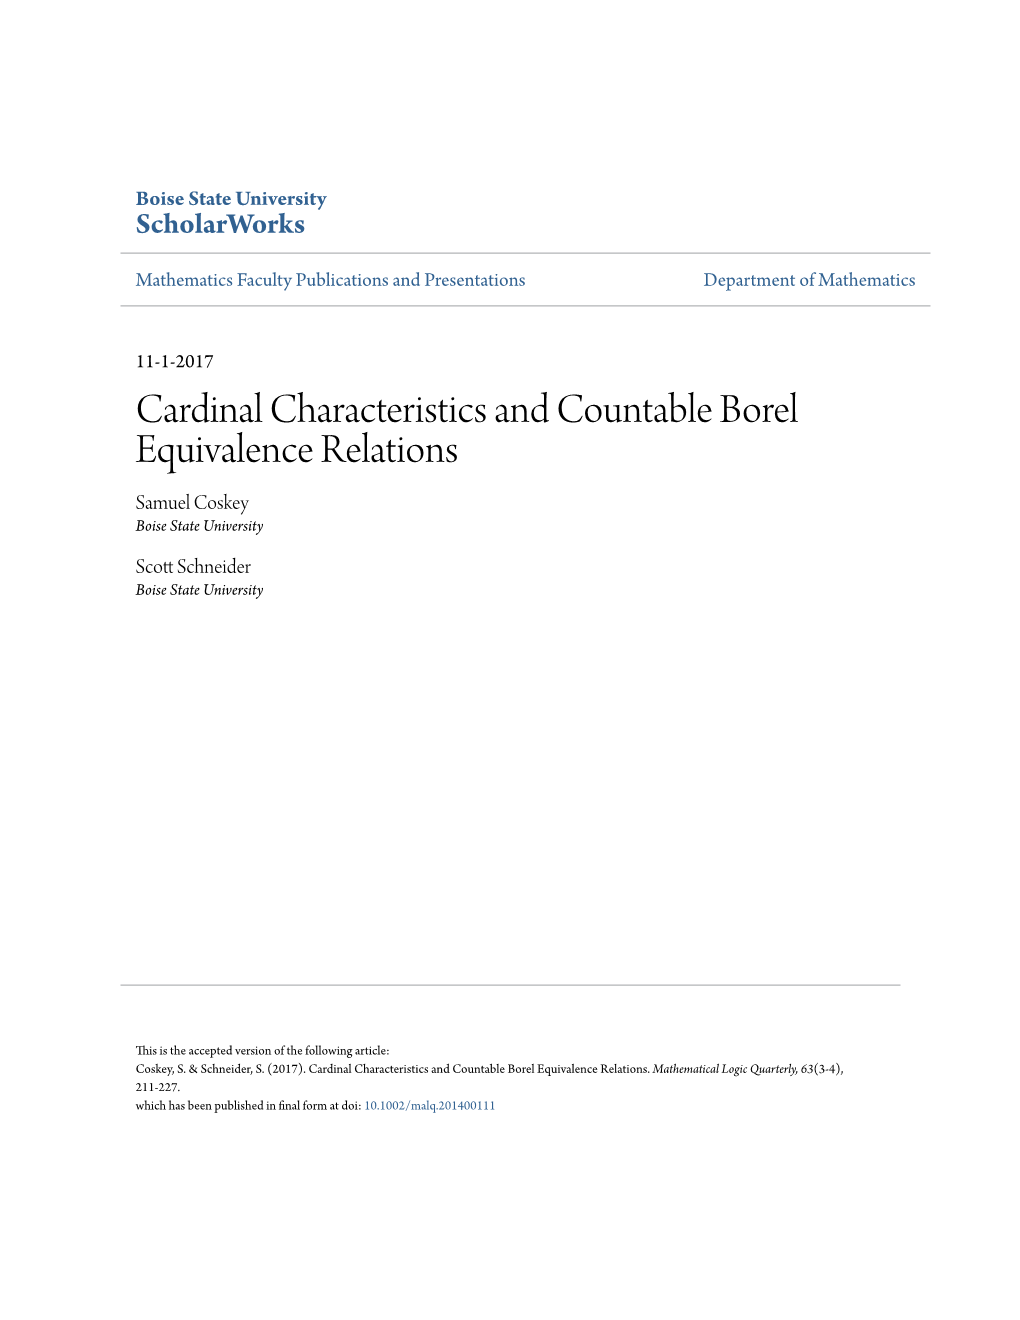 Cardinal Characteristics and Countable Borel Equivalence Relations Samuel Coskey Boise State University